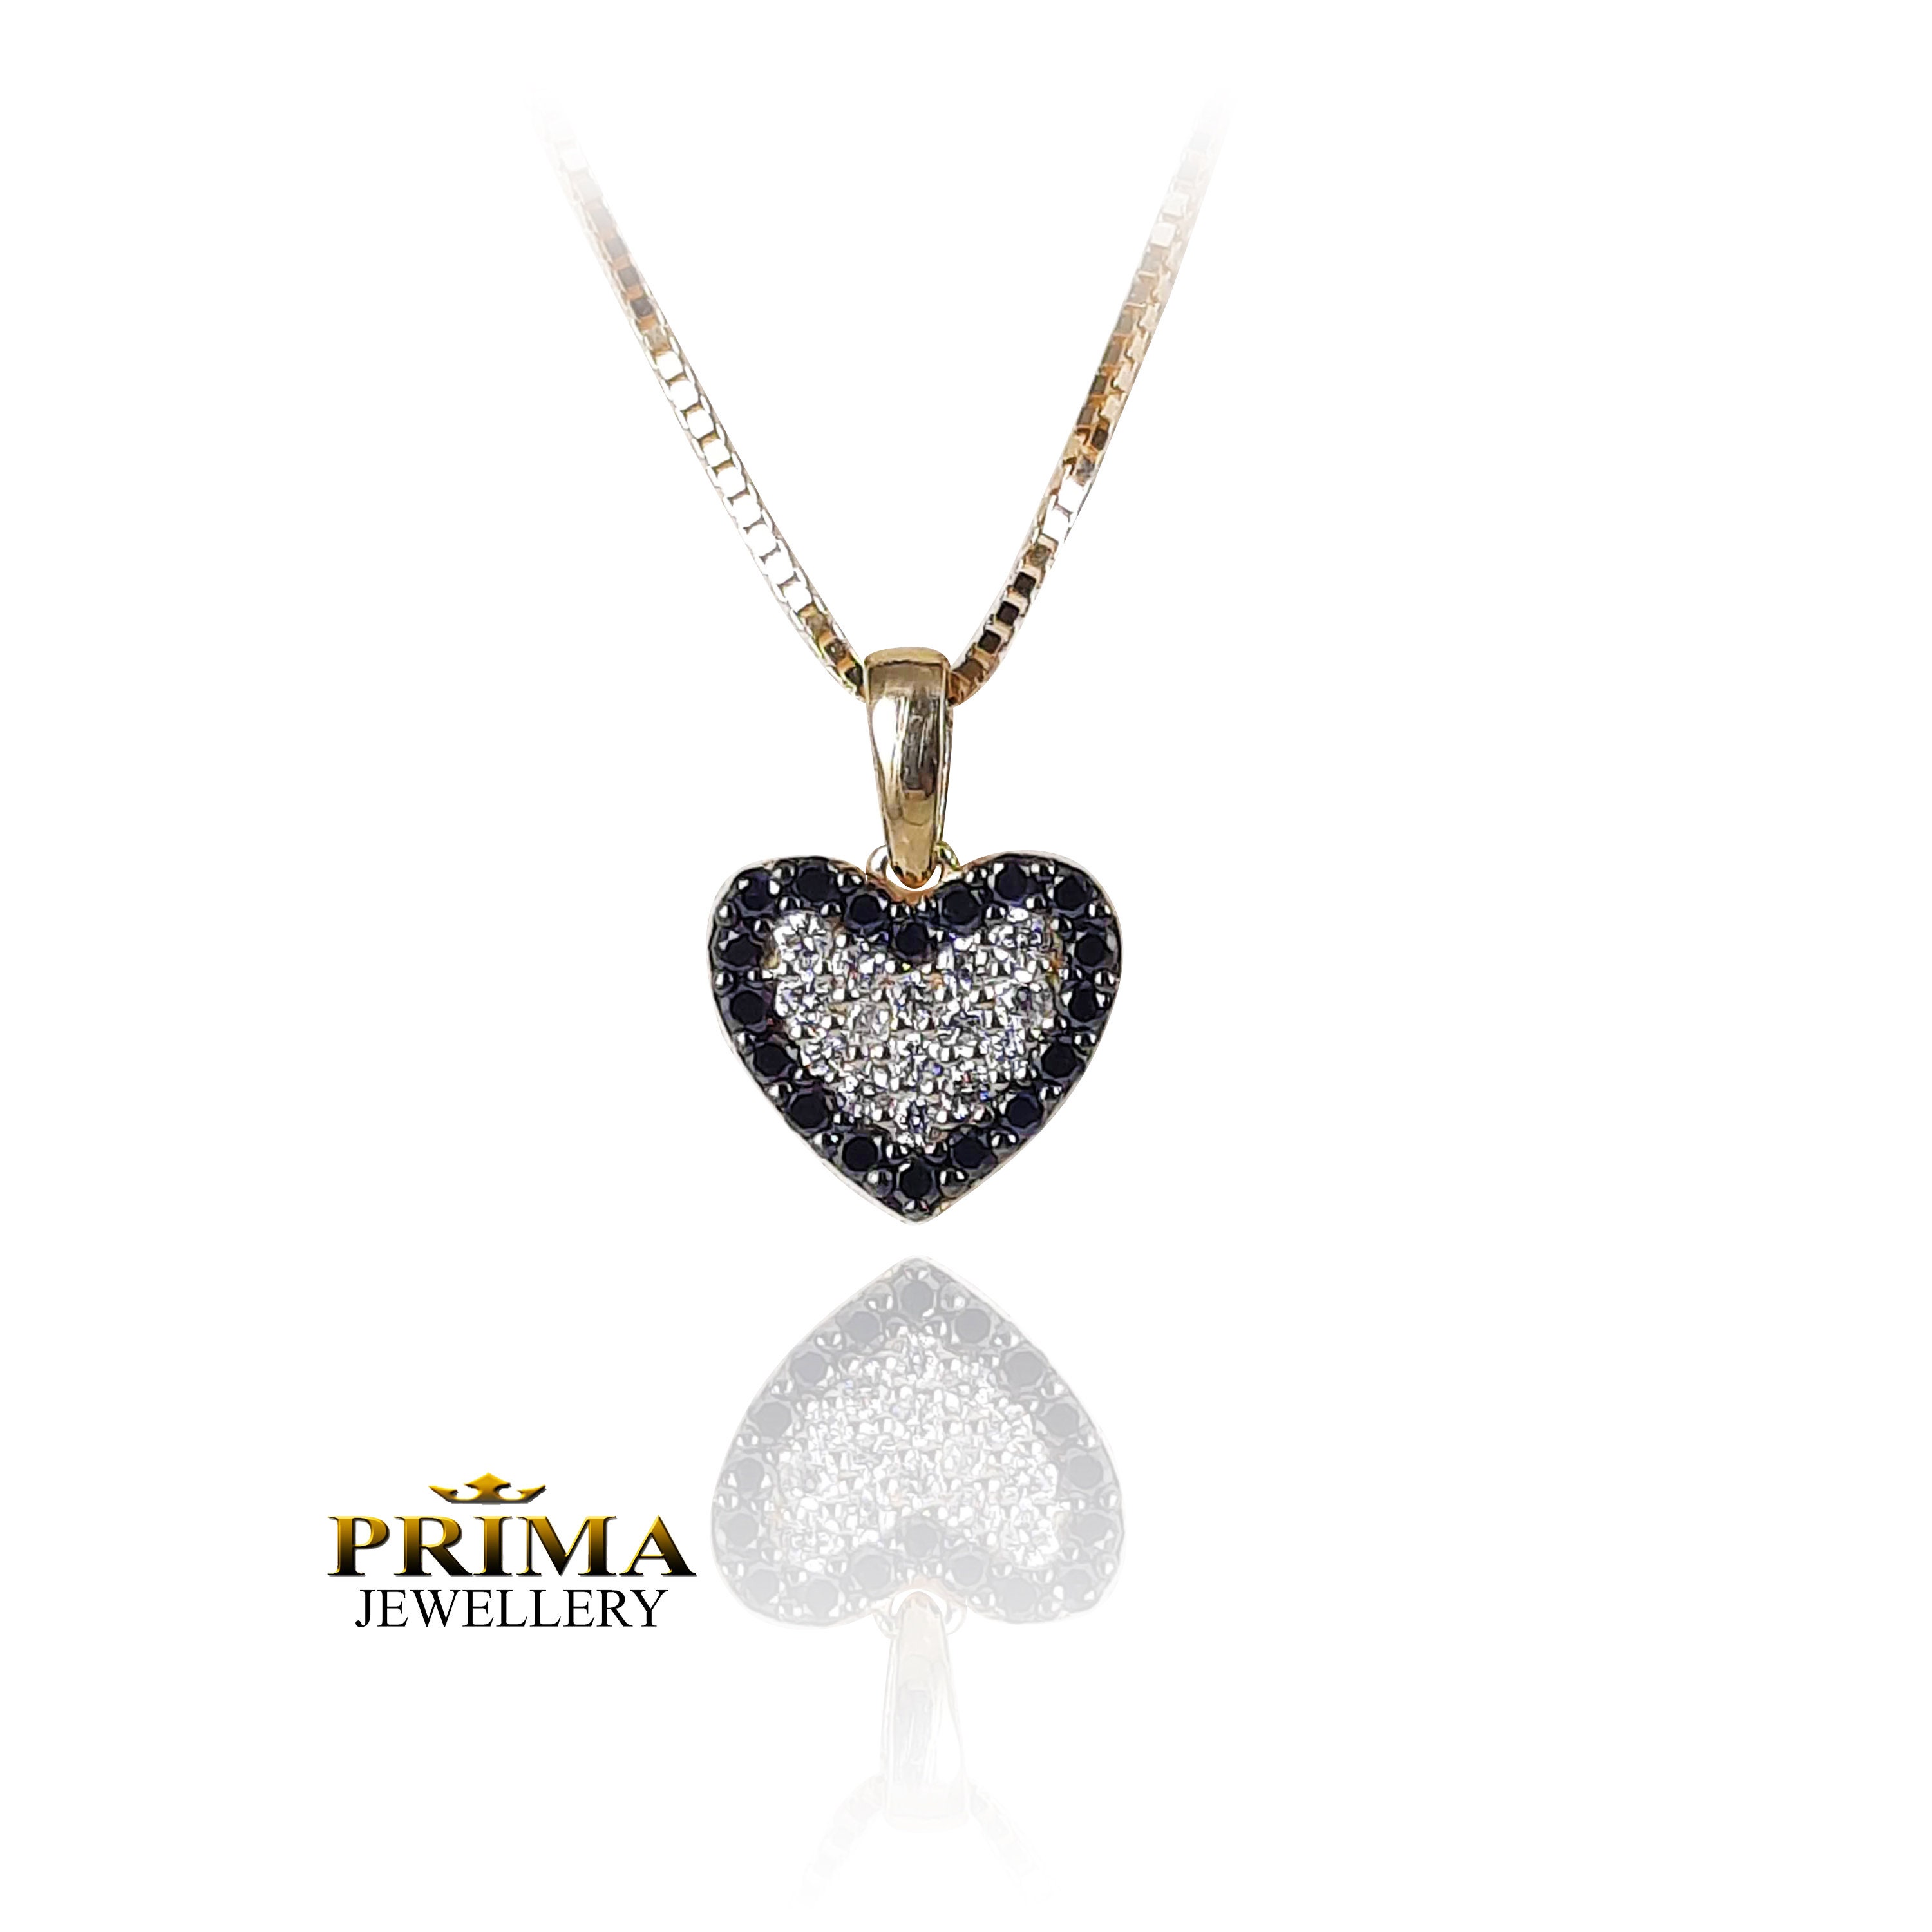 Buy Delicate Heart Necklace With Black Diamonds / 14k Yellow Gold Heart  Pendant / Diamond Heart Charm / Mothers Day Gift Online in India - Etsy